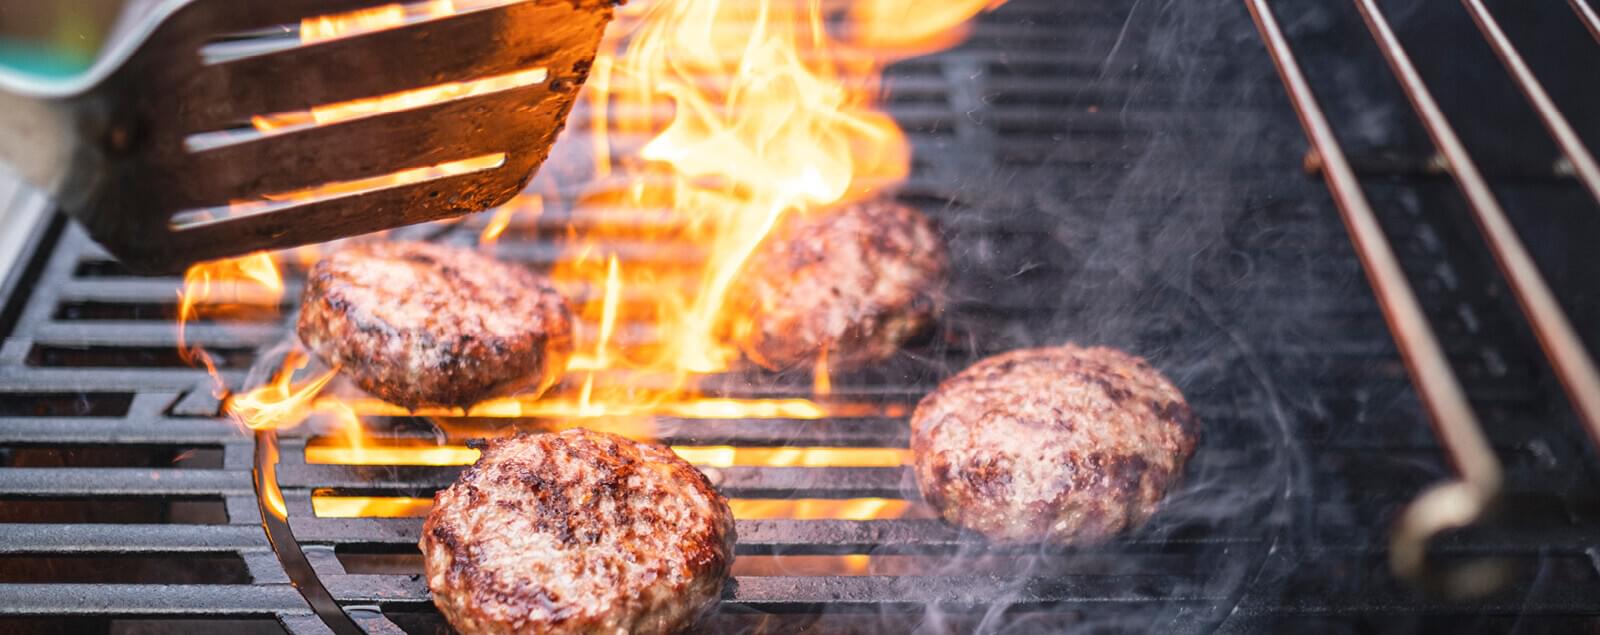 Four burgers cooking on barbeque with flams rising from grill